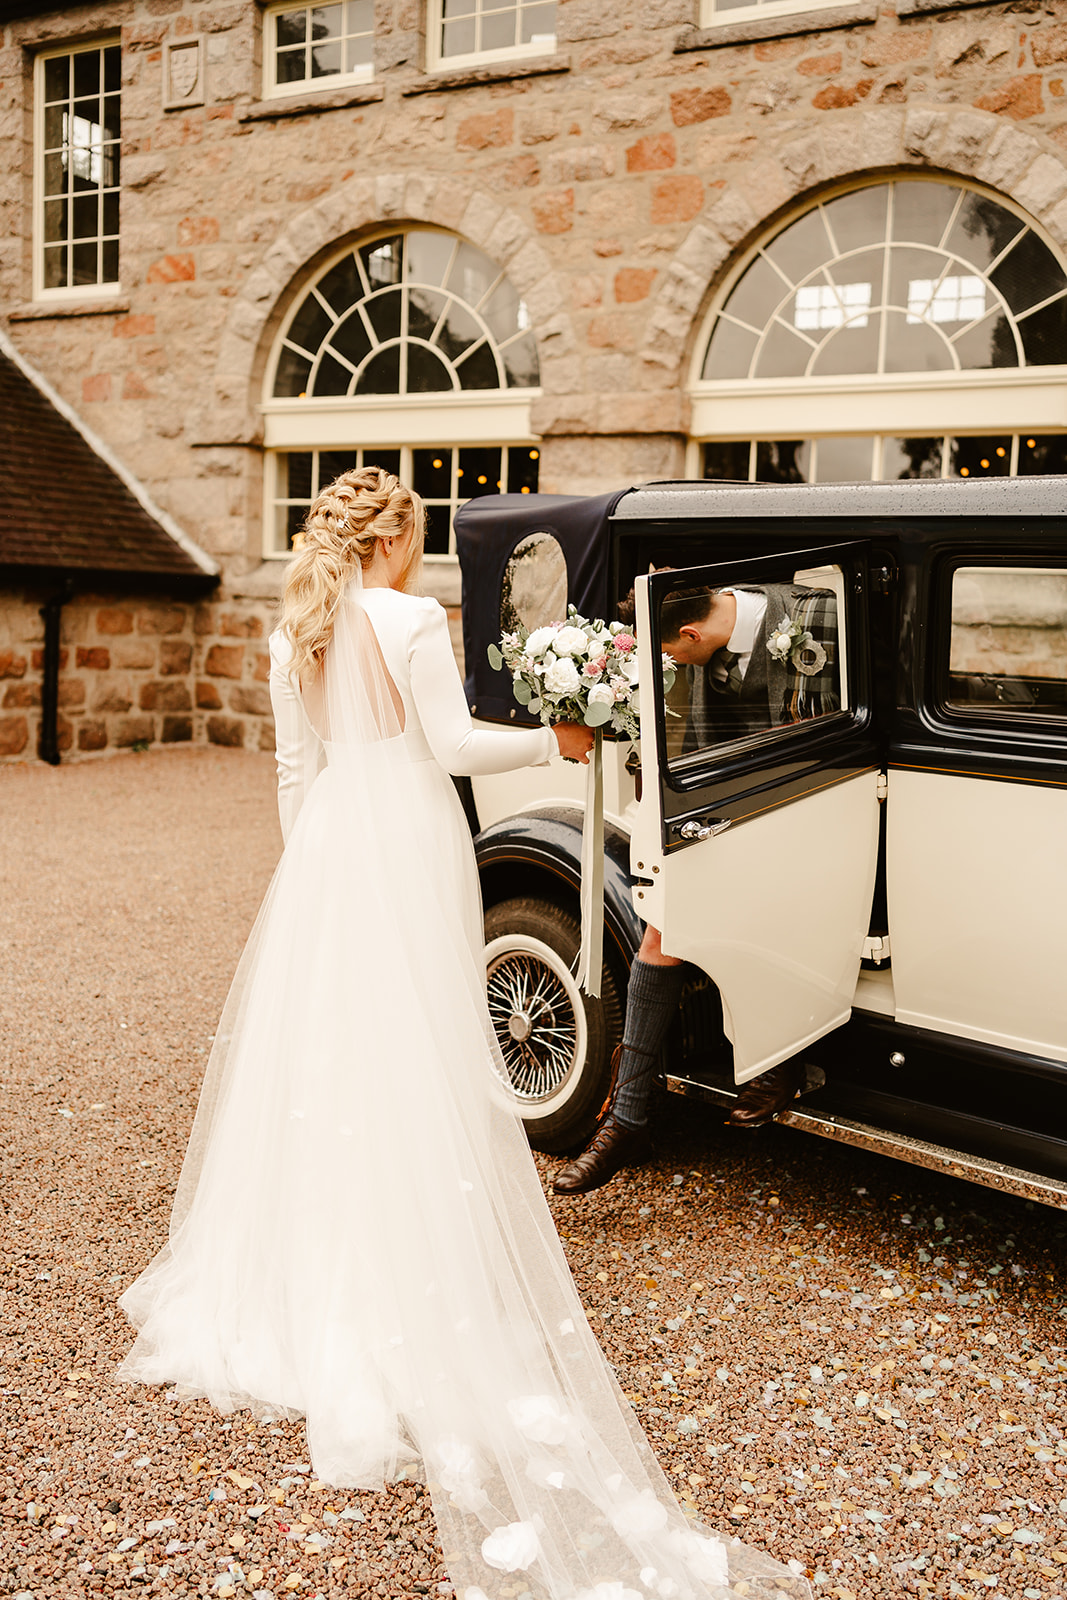 Image of a Bride and Groom standing outside a Vintage Car, outside The Coos Cathedral